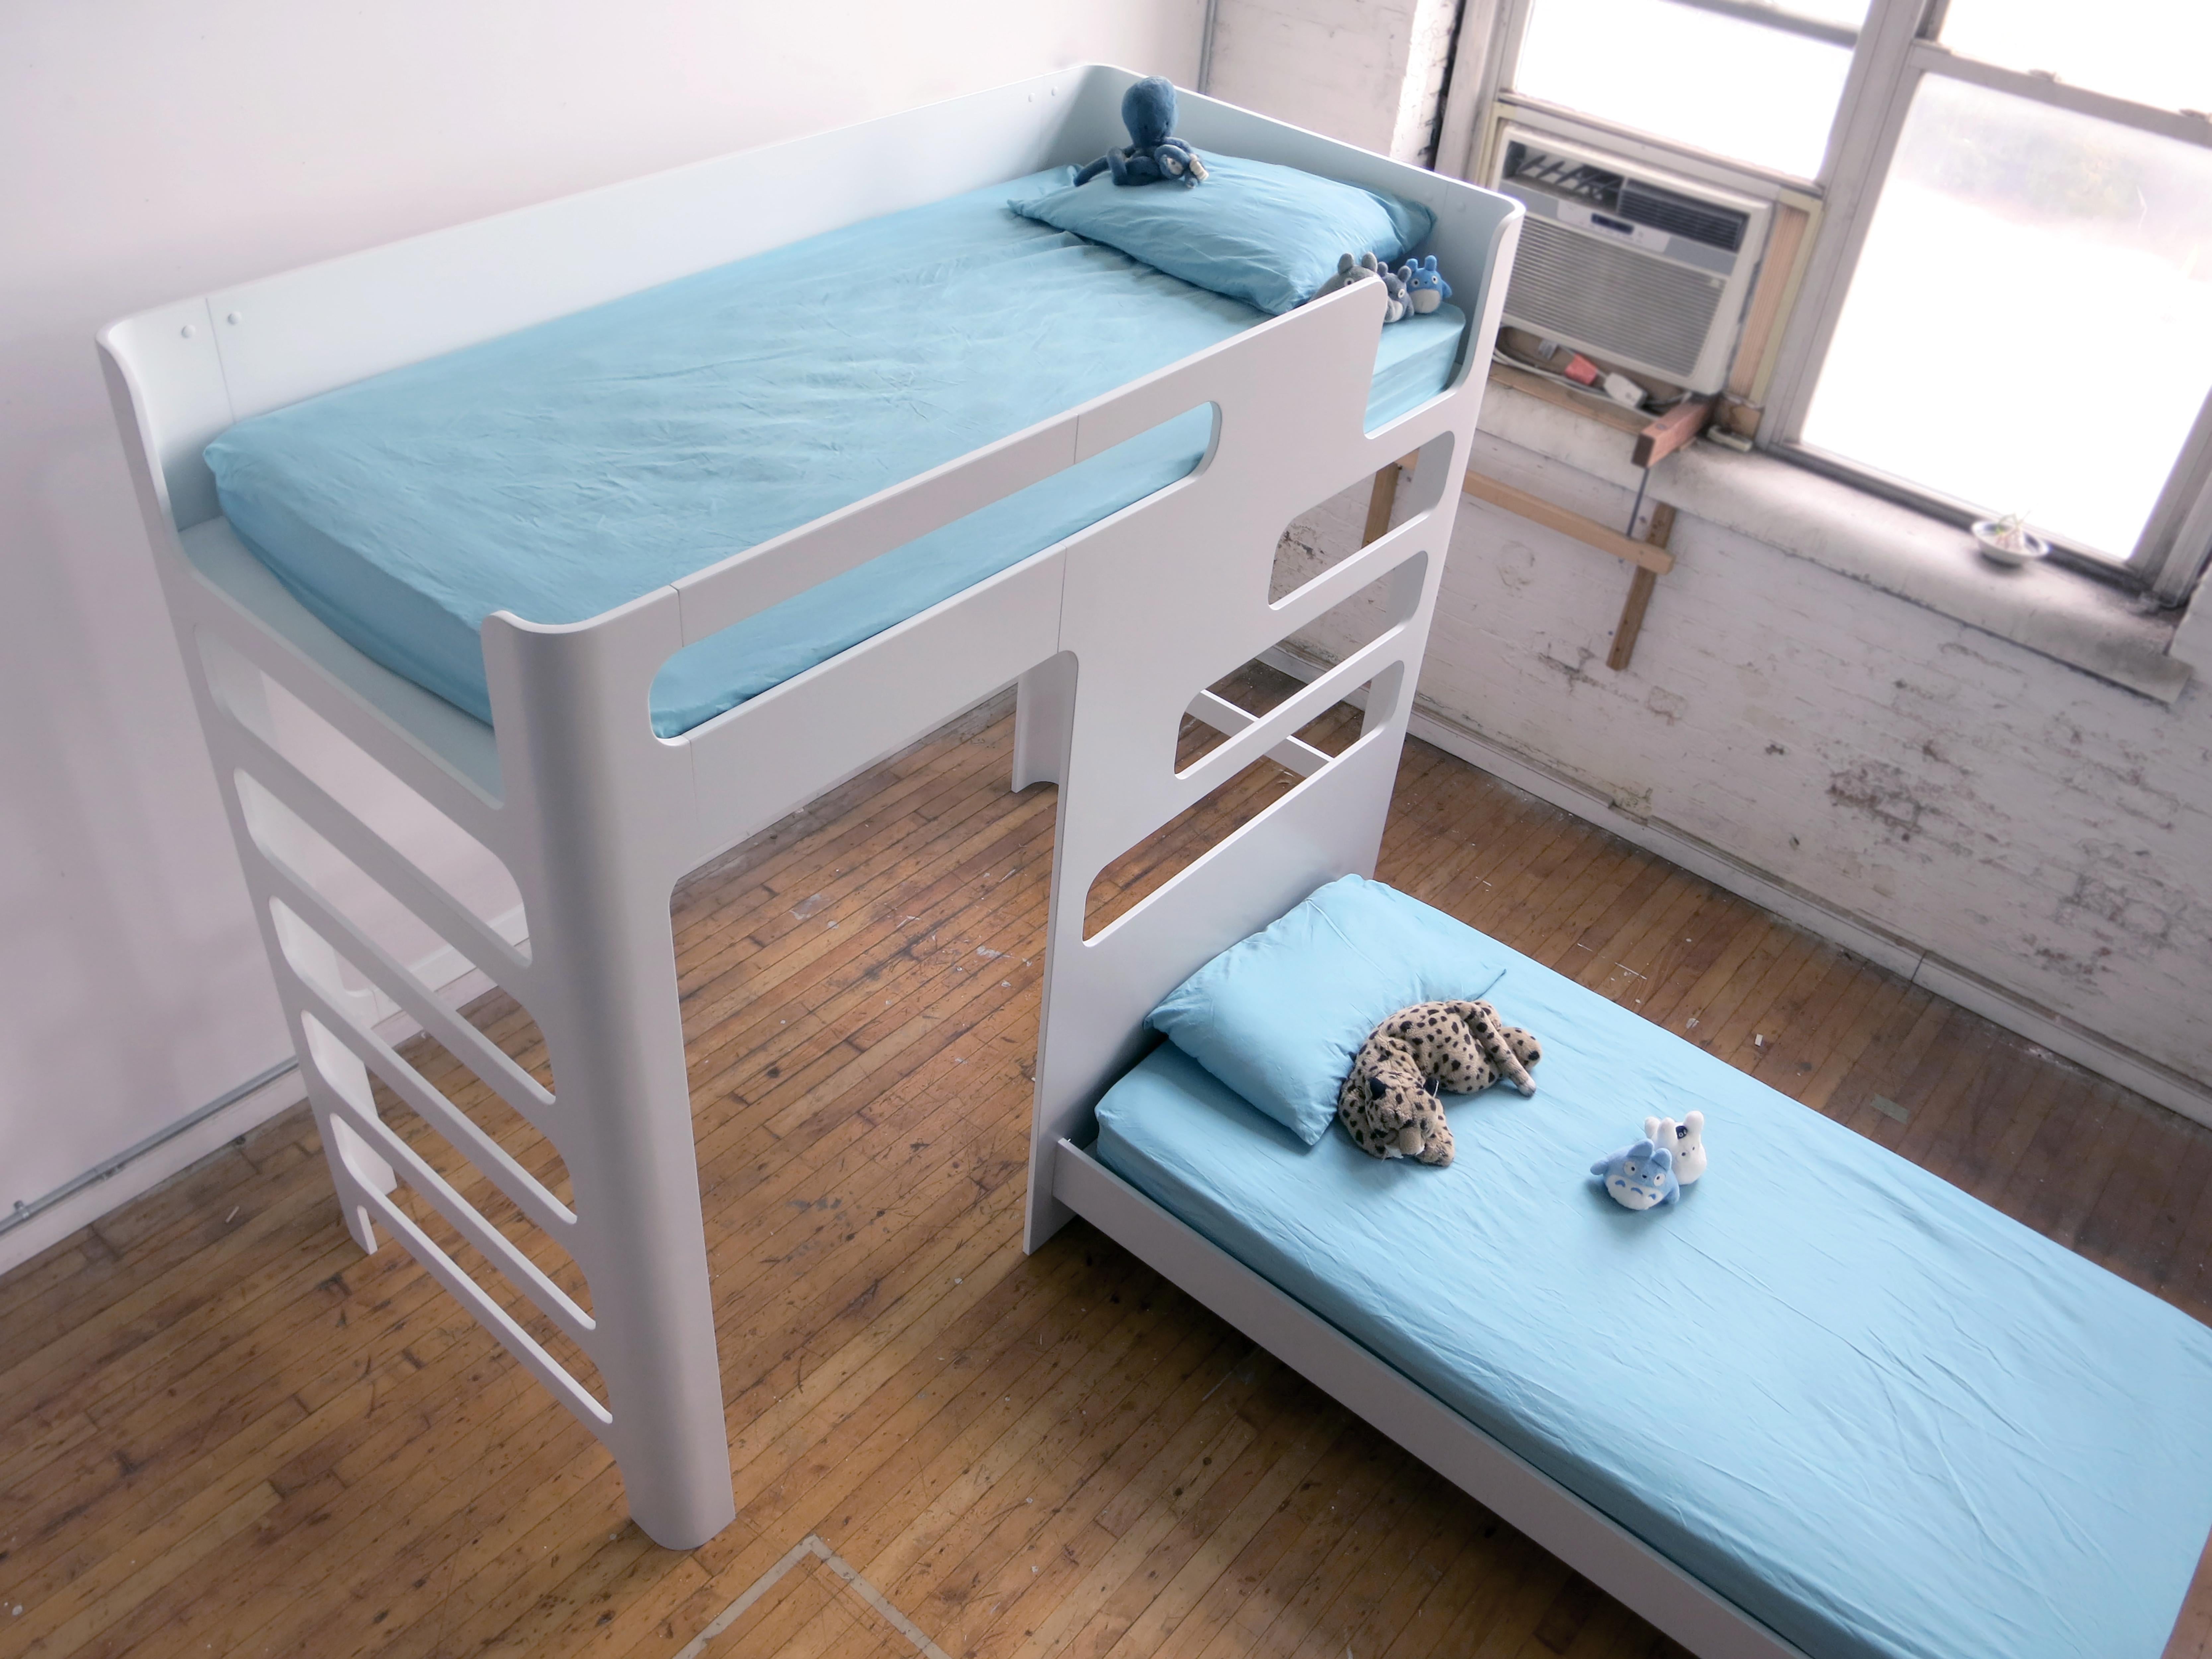 This is a kids' bunk bed. Ships flat and easily assembles with a simple cam and bolt fasteners. Pictured here are two full size mattresses. Main unit is lofted at 5 feet deck. Configuration, color, heights and mattress size can all be customized